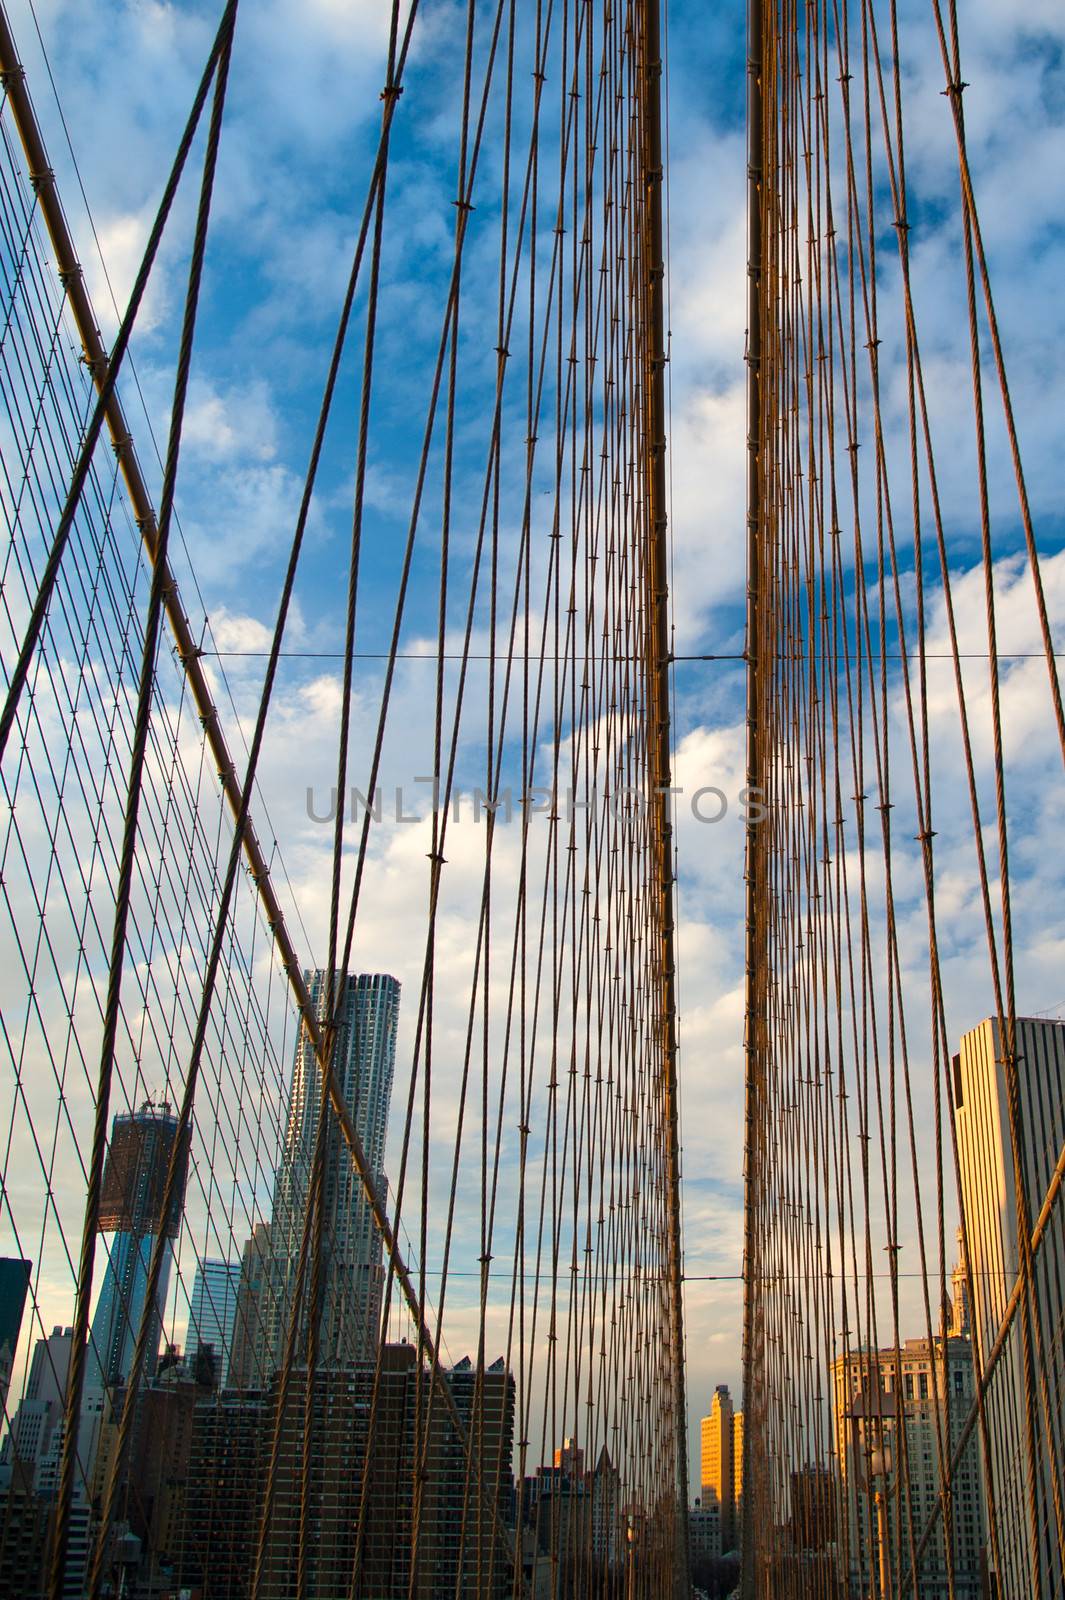 Suspension bridge with skyscrapers in the background, Brooklyn Bridge, Brooklyn, New York City, New York State, USA